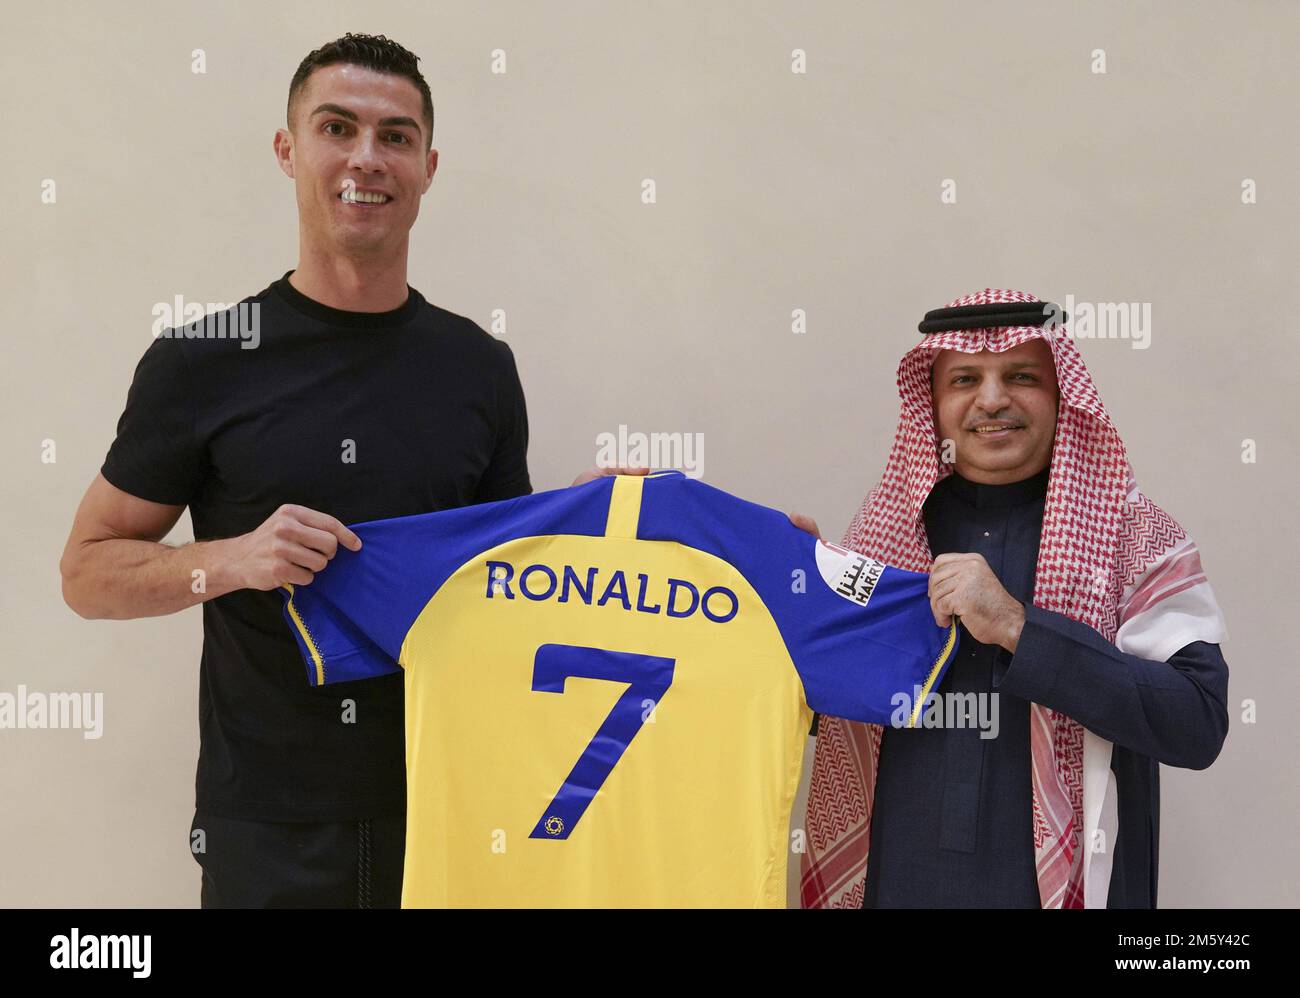 Madrid, Spain. 31st Dec, 2022. Cristiano Ronaldo (L) holds a team jersey of Saudi Arabian club Al Nassr with his name and No. 7 on it, in Madrid, Spain on Friday, December 30, 2022. Ronaldo has signed with the Saudi Arabian club in a deal worth a reported $200 million. Photo by Al Nassr FC/UPI Credit: UPI/Alamy Live News Stock Photo